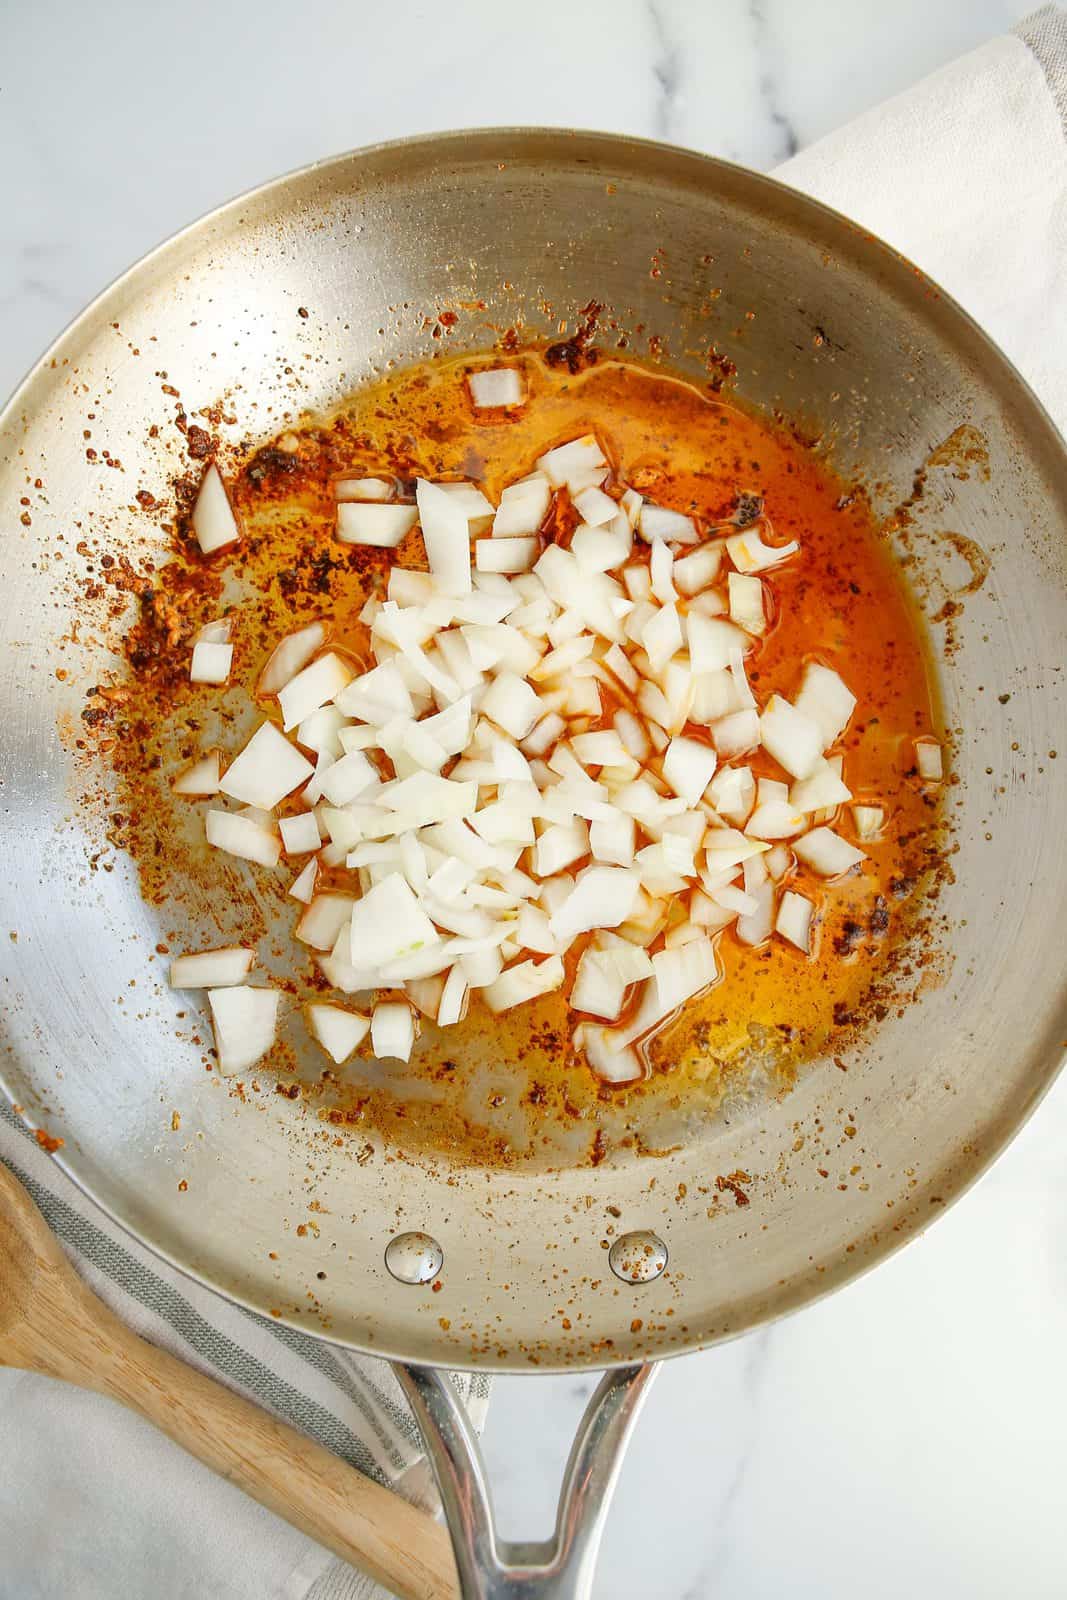 Onions being sauteed in skillet.